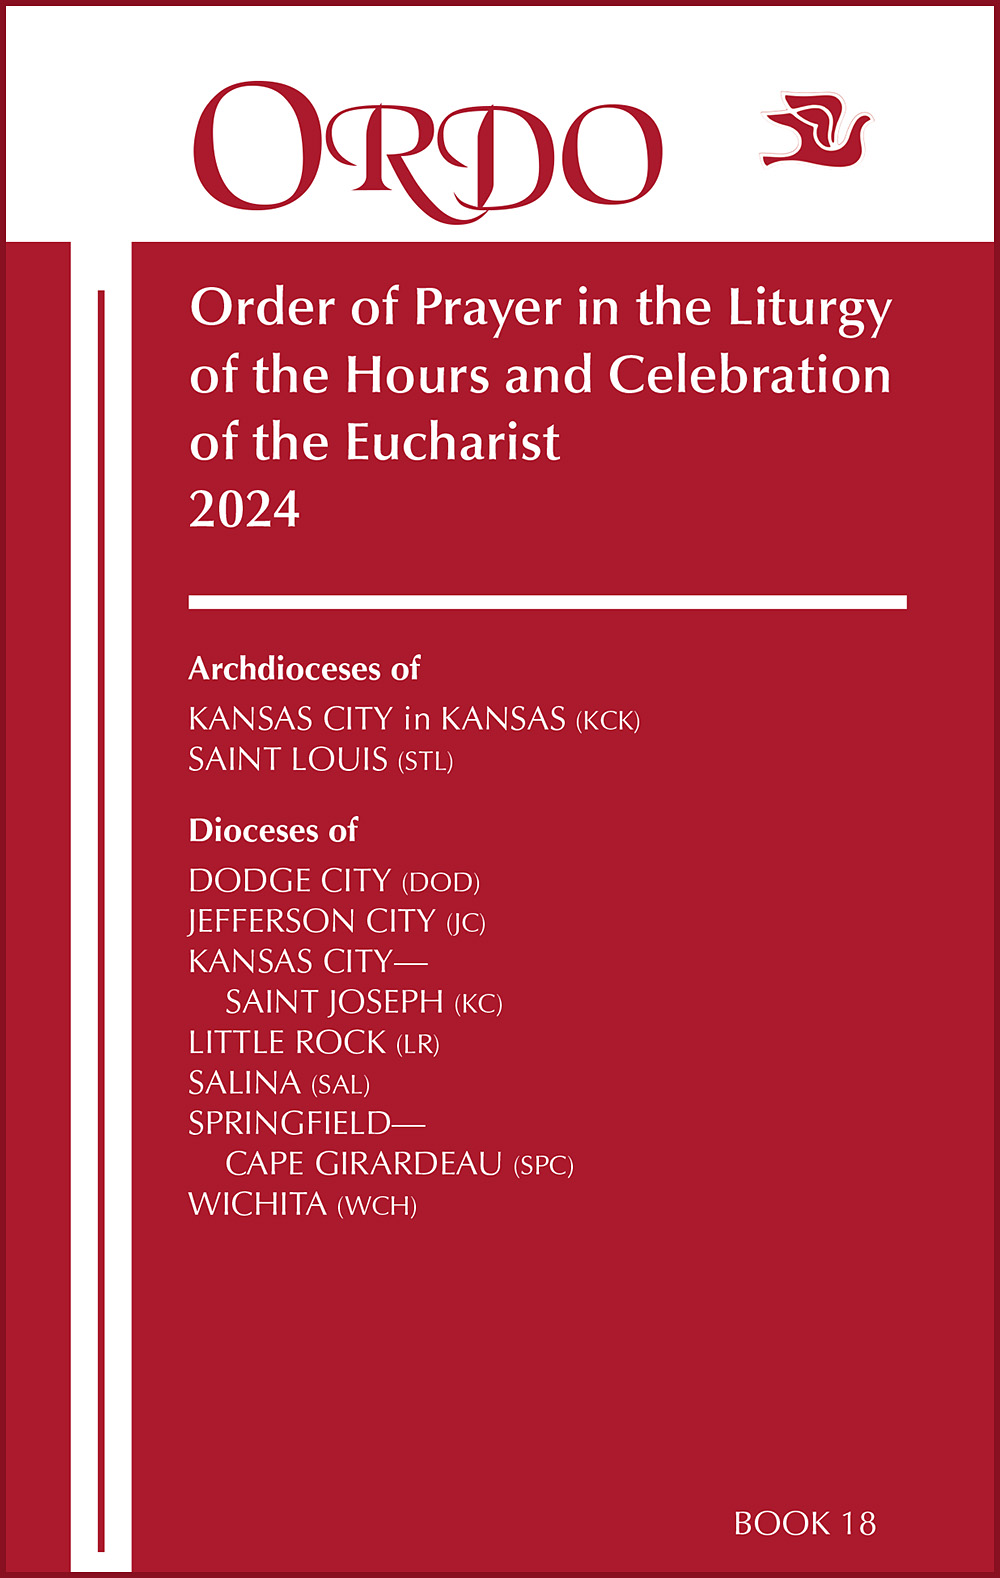 https://shop.catholicsupply.com/Shared/Images/Product/2024-Ordo-Order-of-Prayer-in-the-Liturgy-of-the-Hours-and-Celebration-of-the-Eucharist/202418-1-.jpg